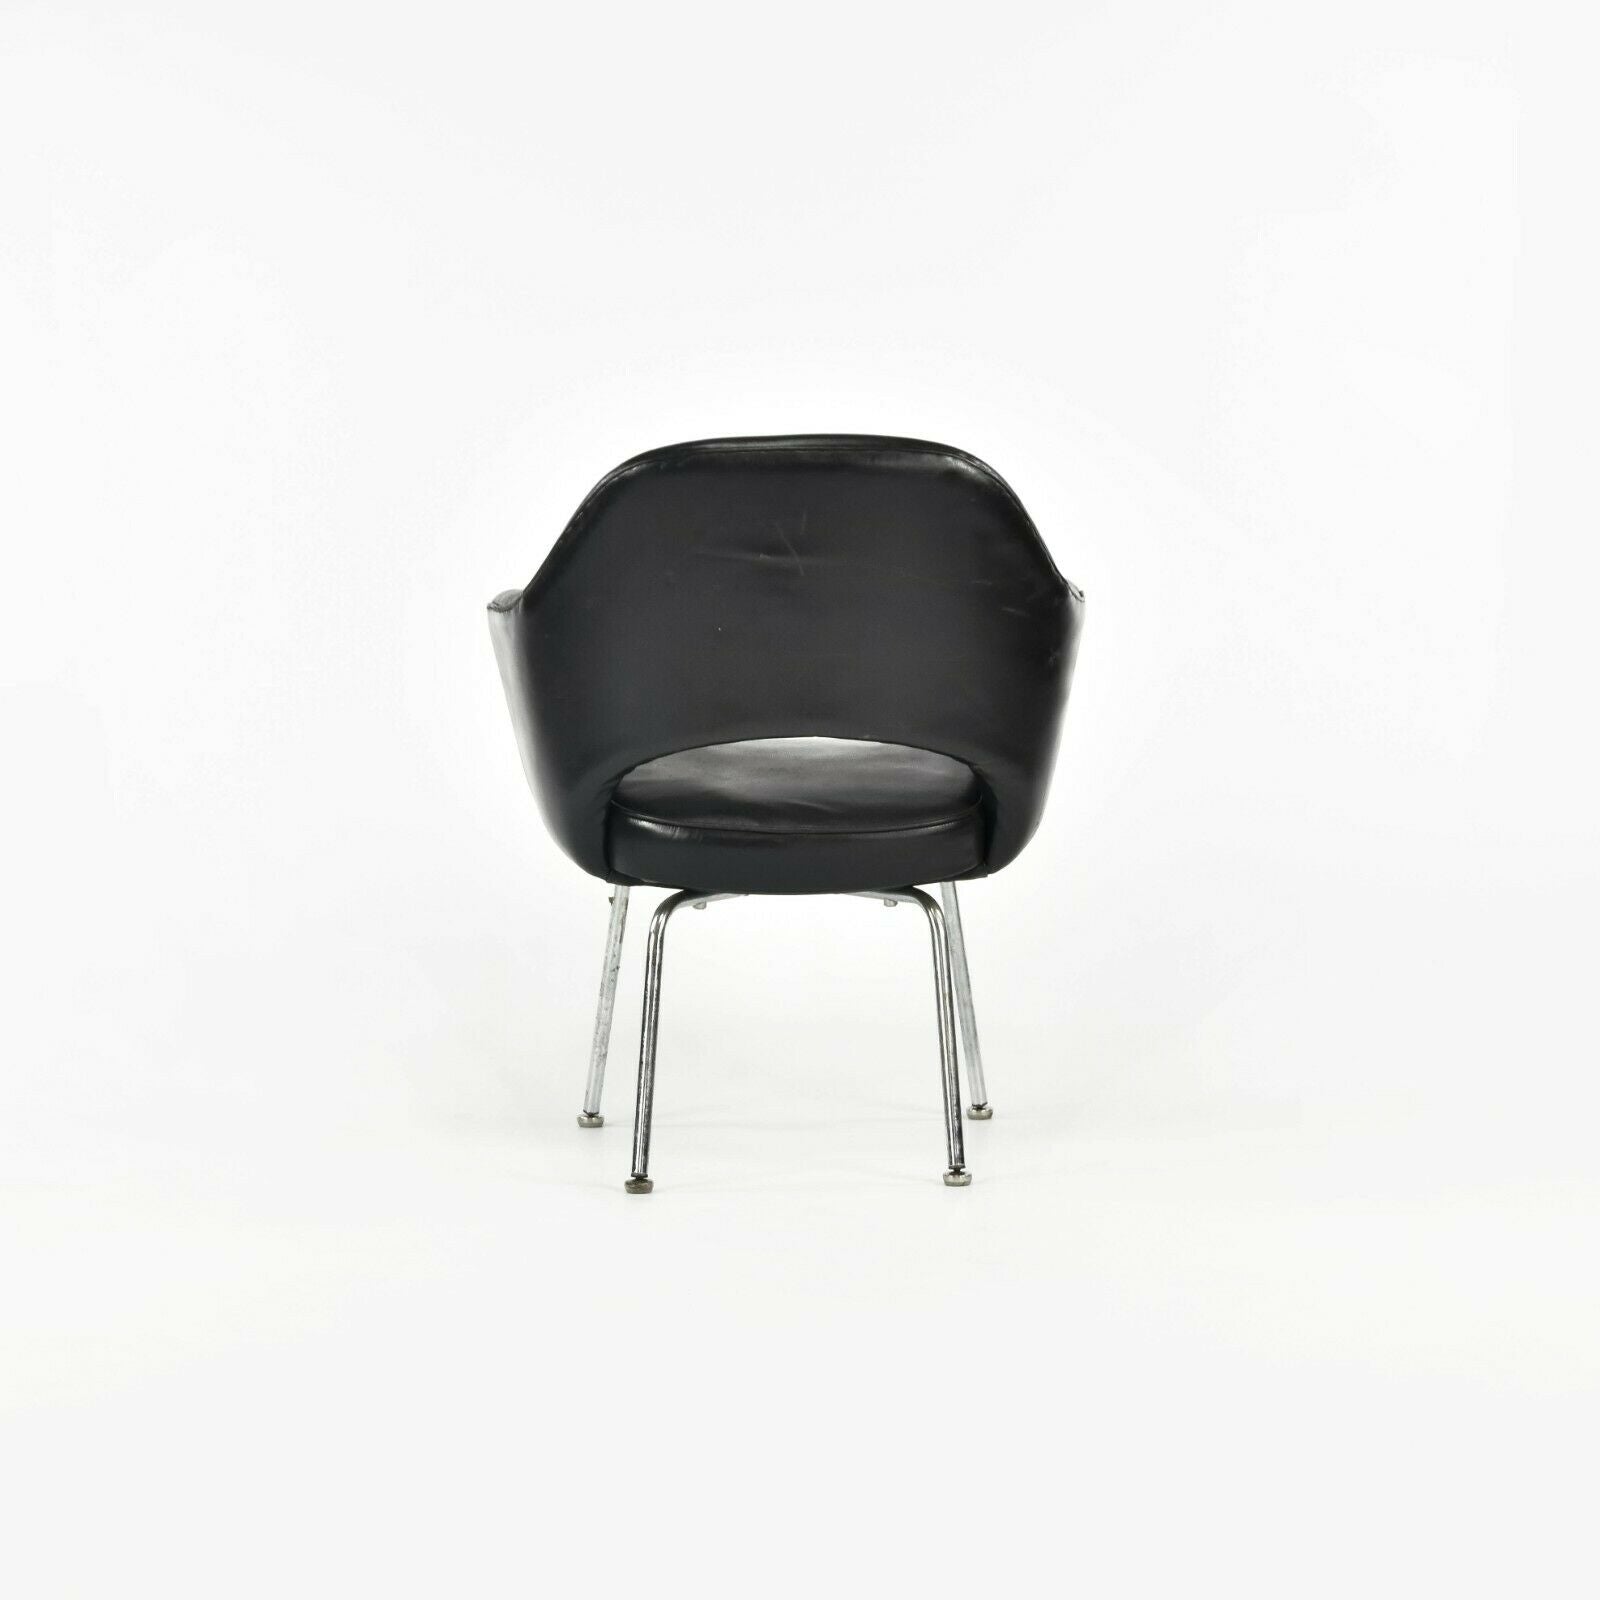 1960s Eero Saarinen for Knoll Executive Dining Arm Chair in Chrome & Black Leather